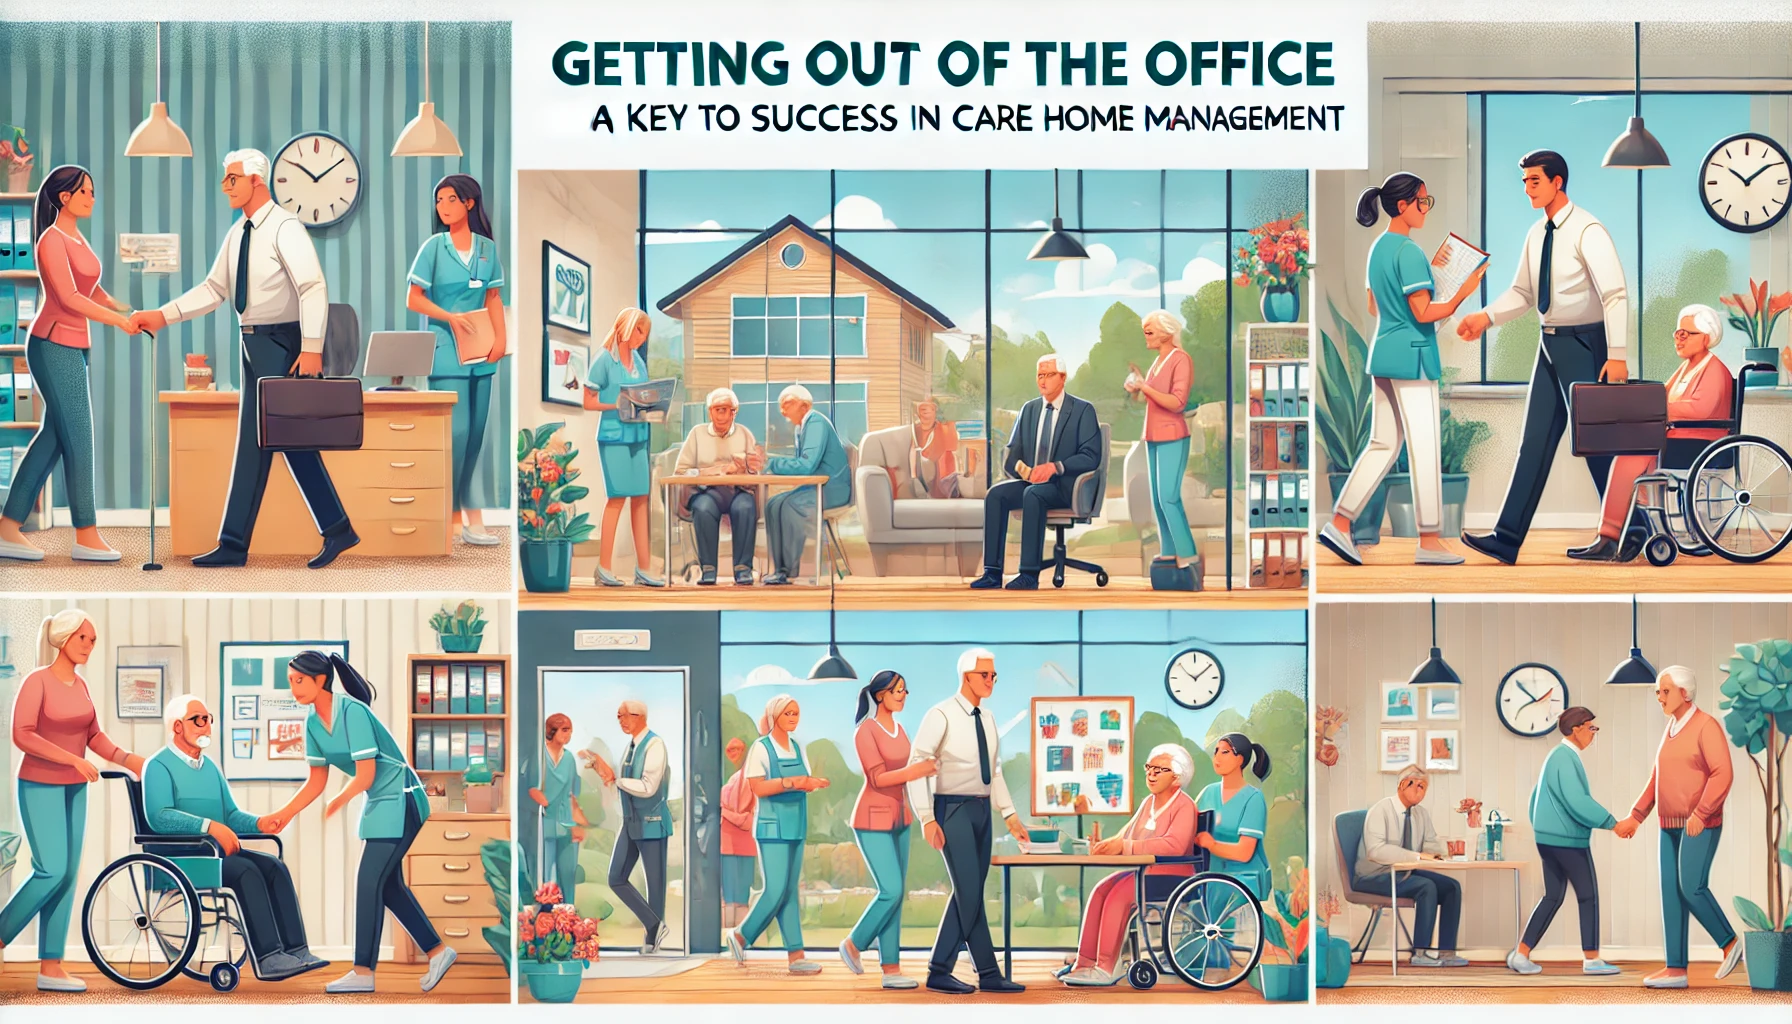 Getting Out of the Office: A Key to Success in Care Home Management – Easier said than done!